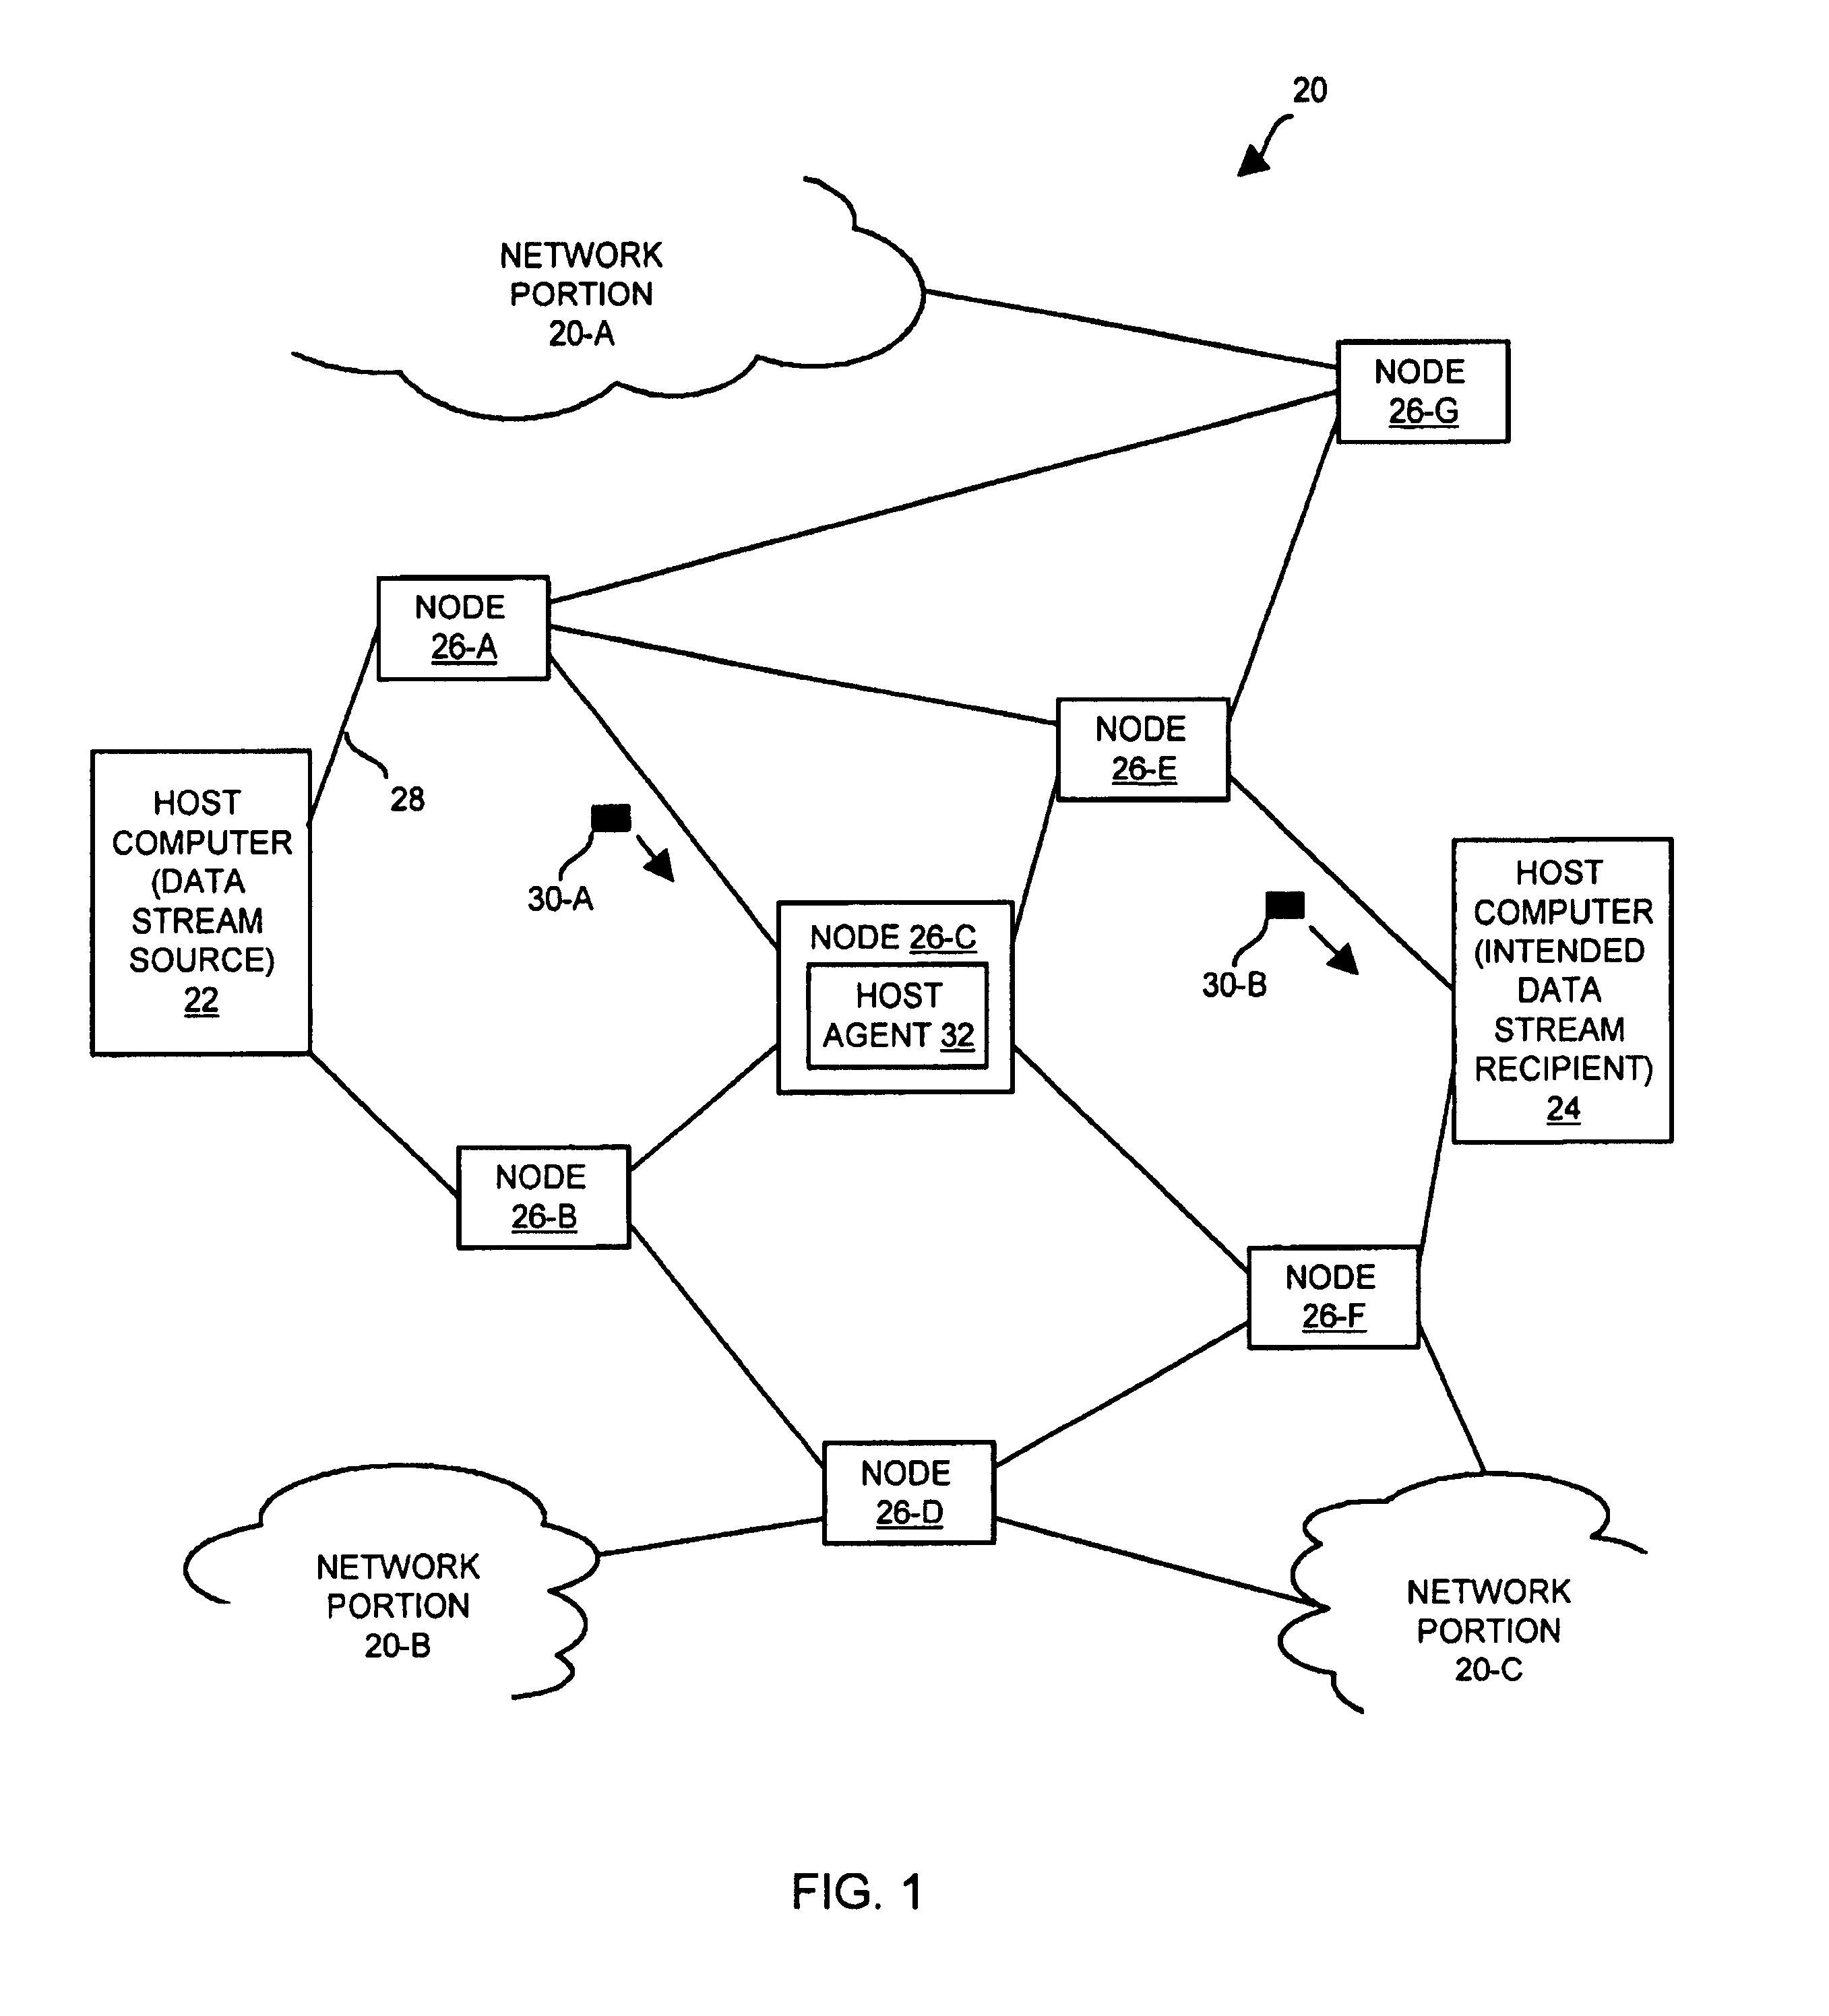 Methods and apparatus for controlling a data stream using a host agent acting on behalf of a host computer